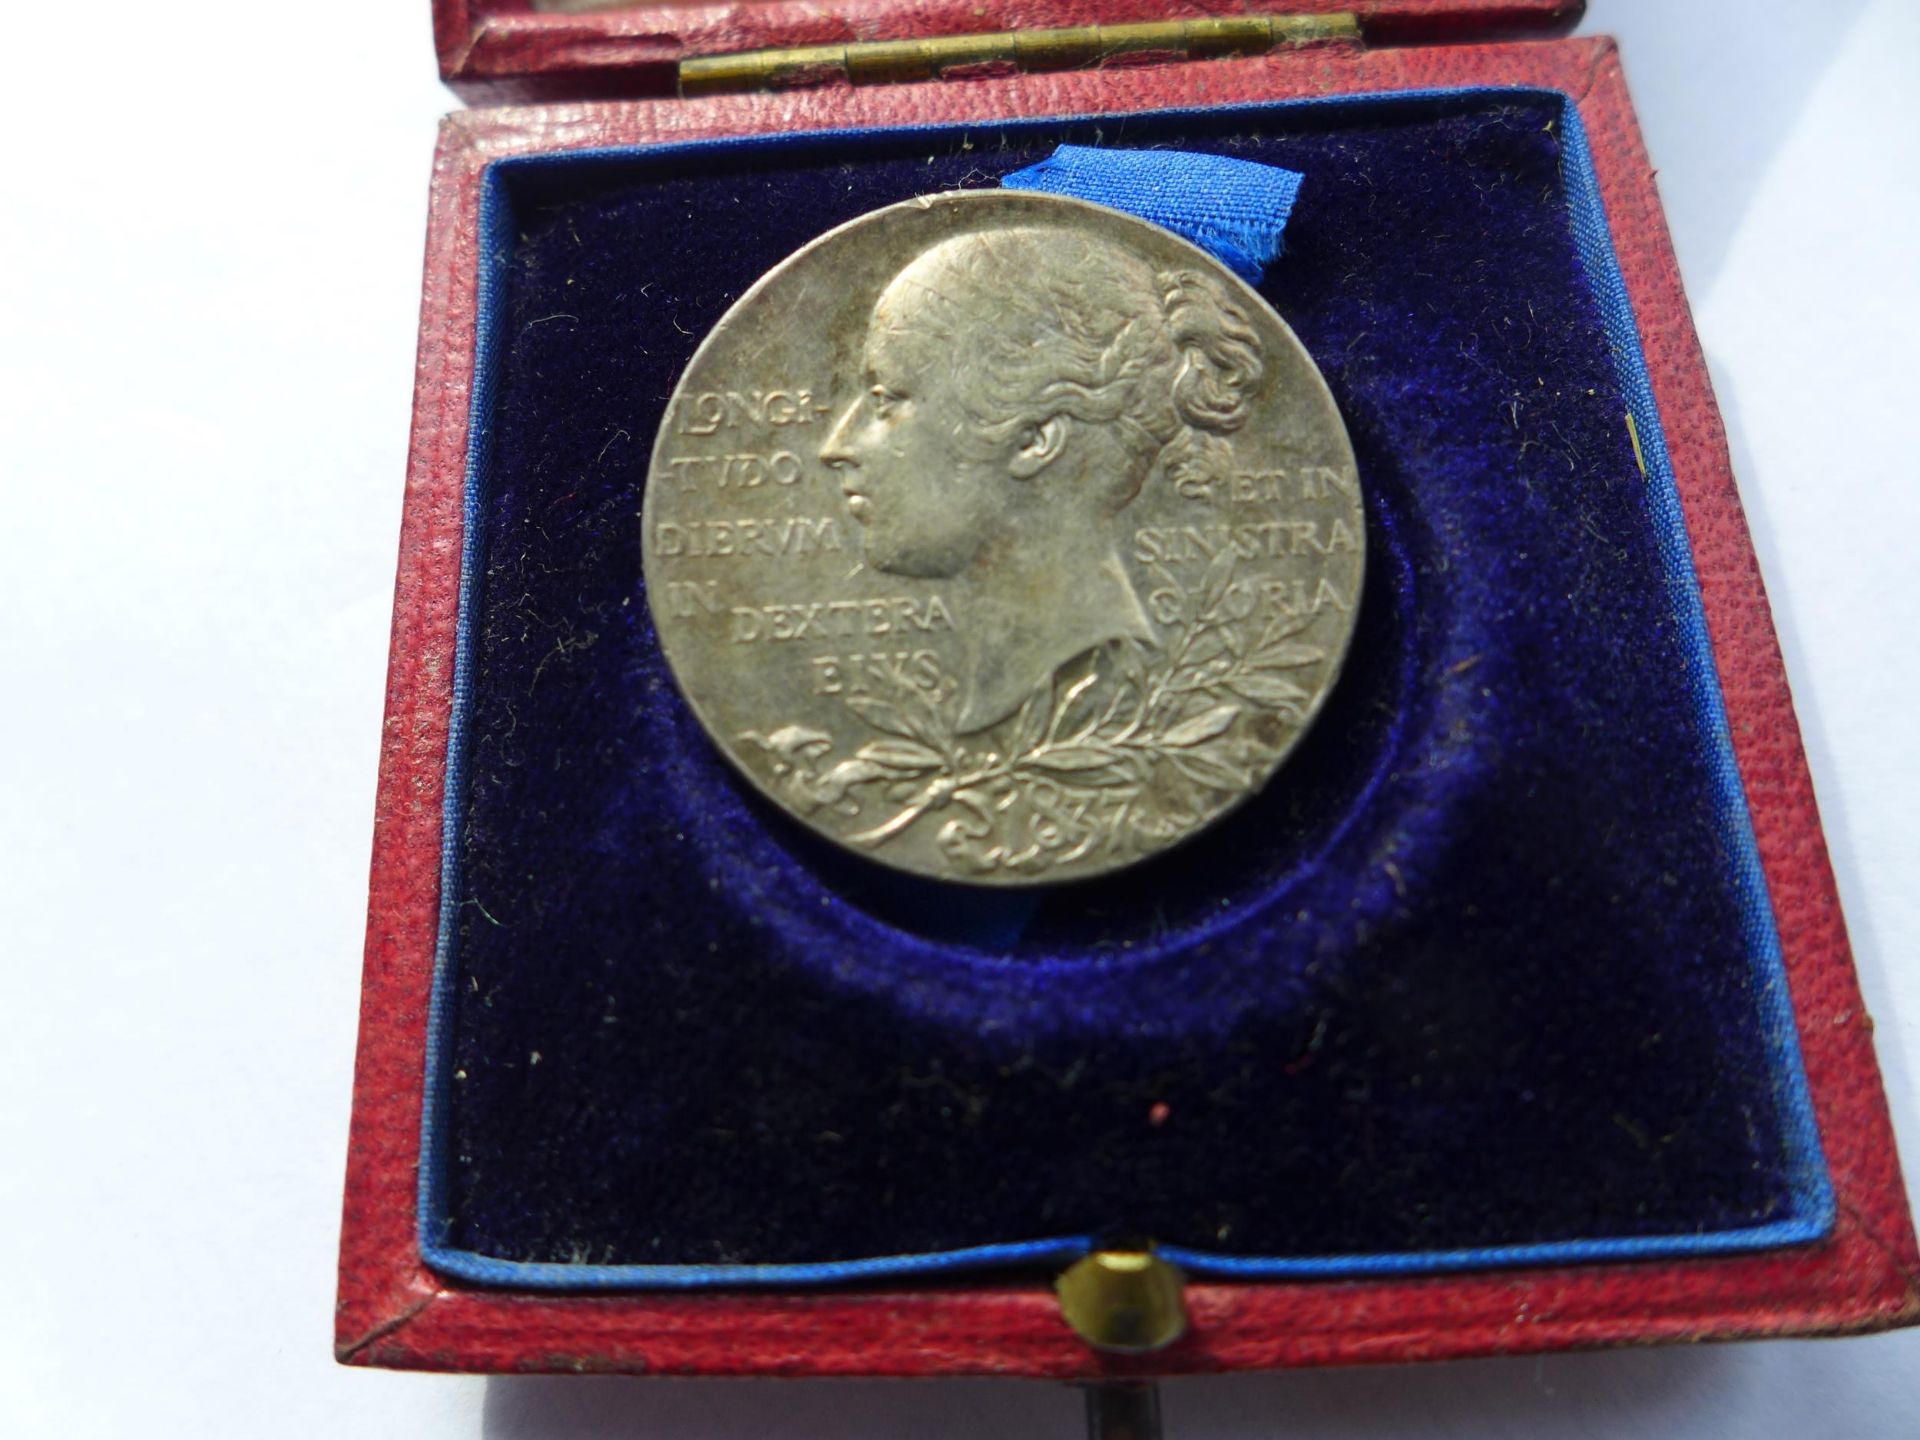 A CASED QUEEN VICTORIA DIAMOND JUBILEE SILVER 25MM MEDAL DATED 1897 - Image 3 of 3